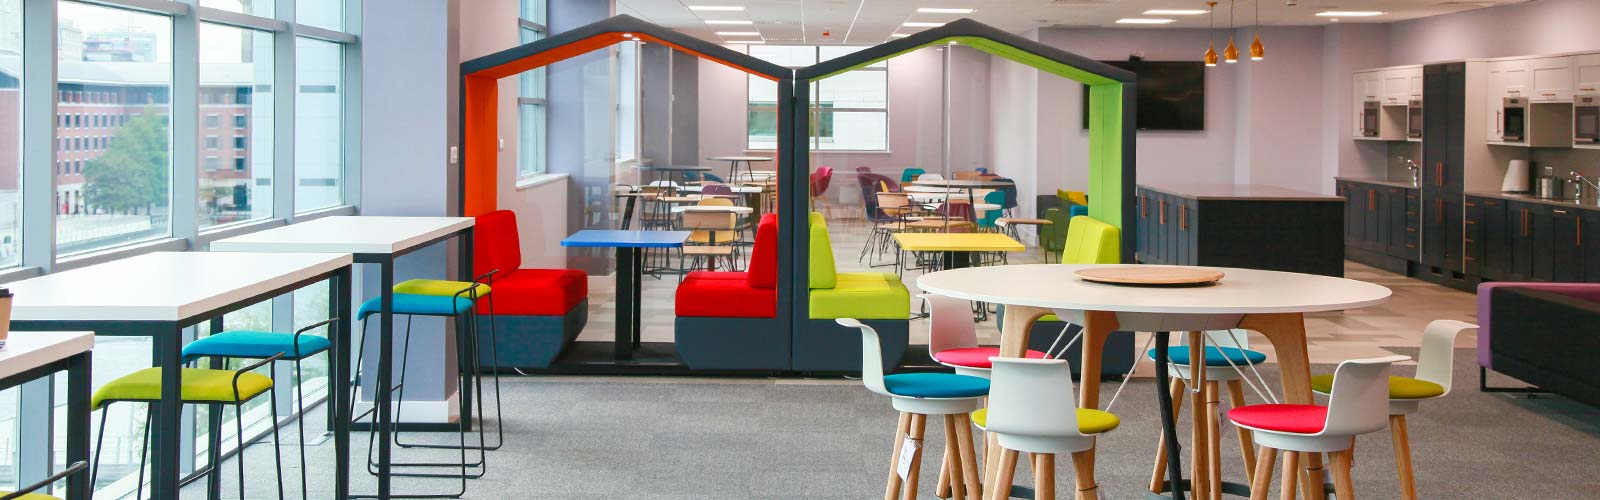 To booth or not to booth? Benefits for your office interior design -  Penketh Group